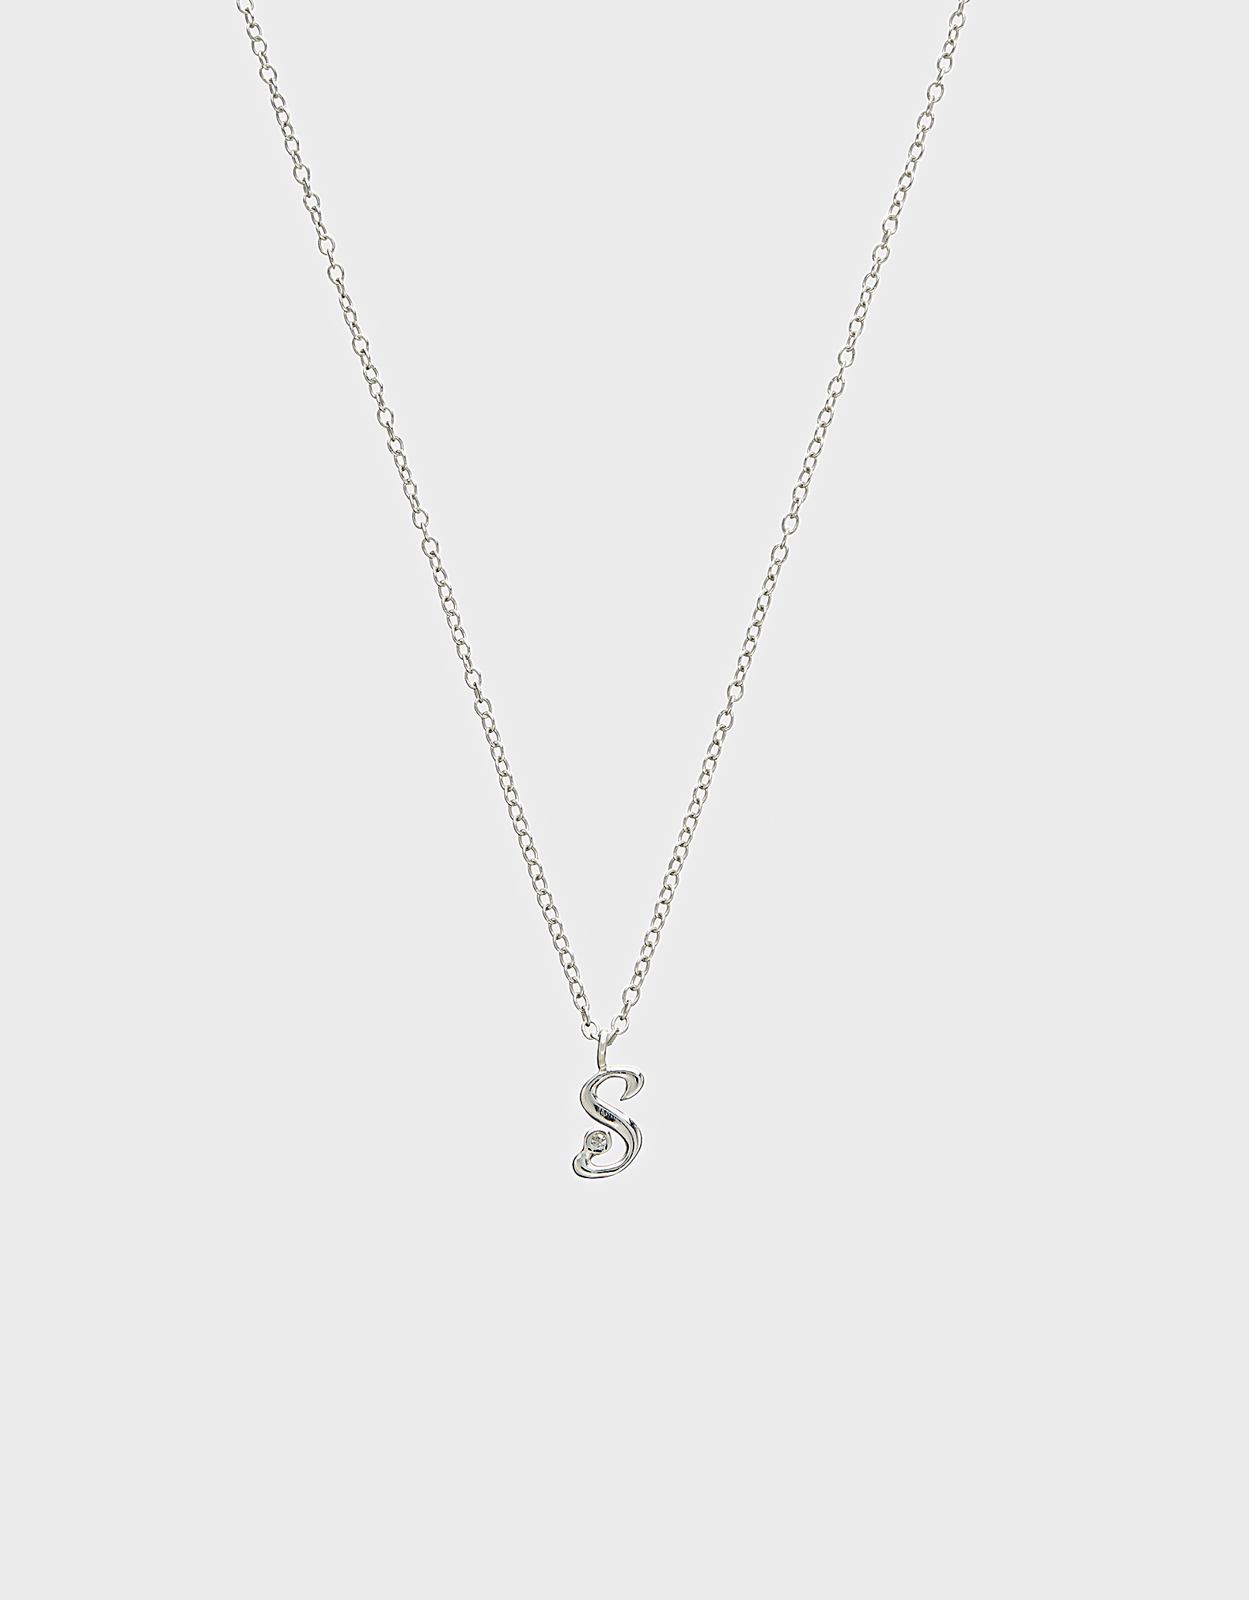 Gold-Plated Arabic Initial Pendant Necklace - B | Pendant necklaces |  Accessorize Global